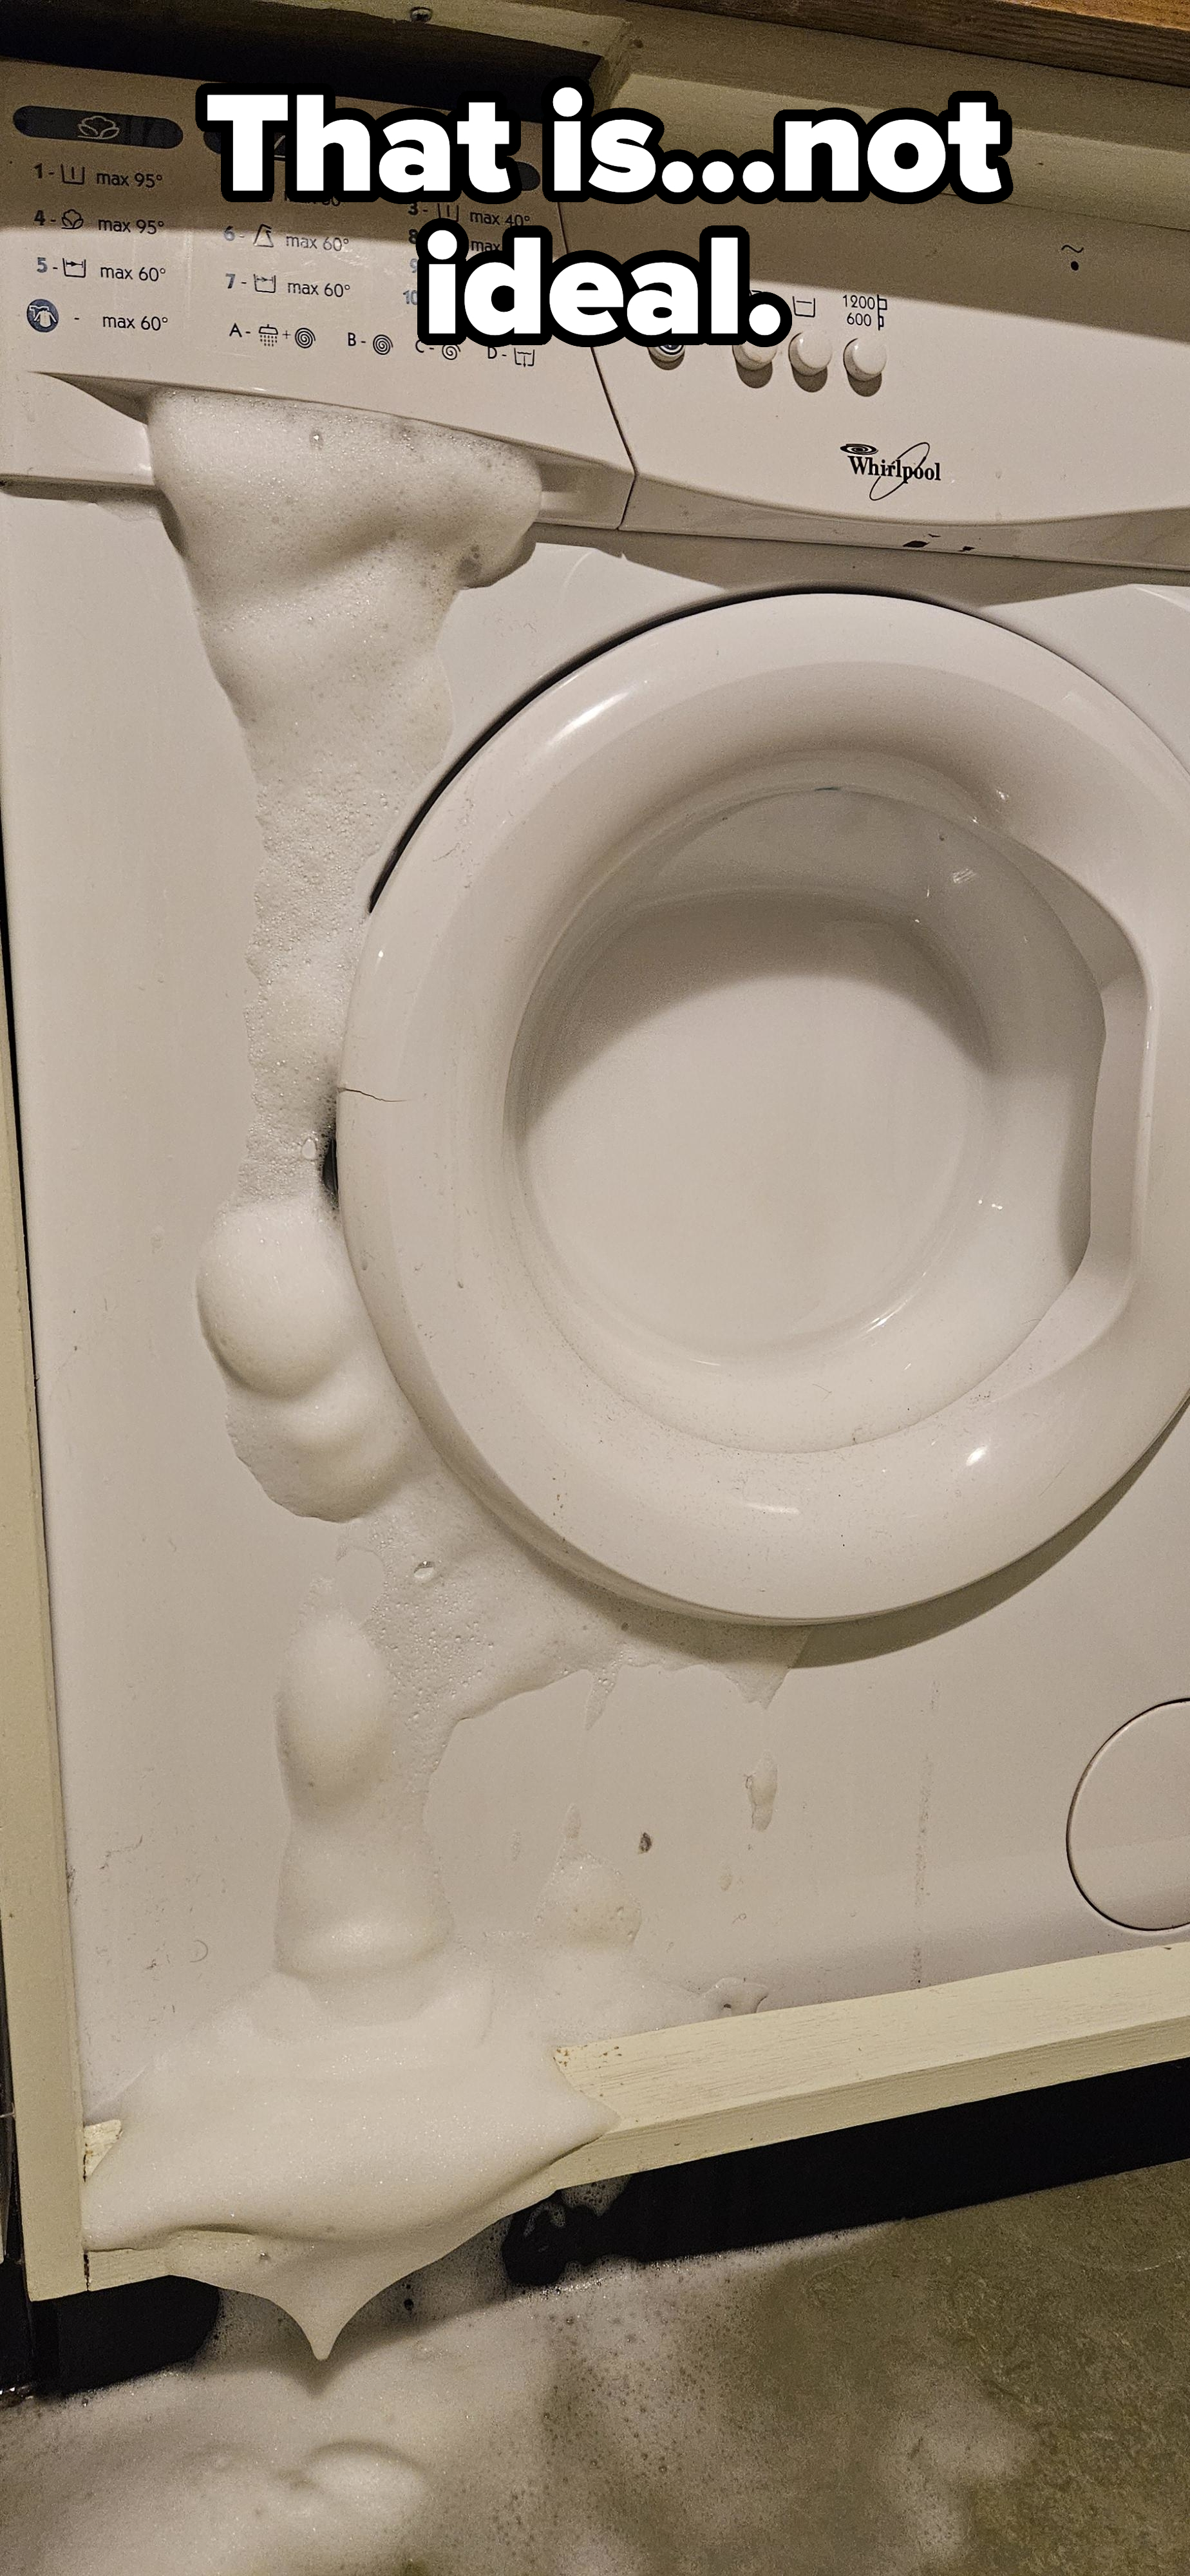 &quot;That is...not ideal&quot;: Closed washing machine has soapy bubbles emerging from it